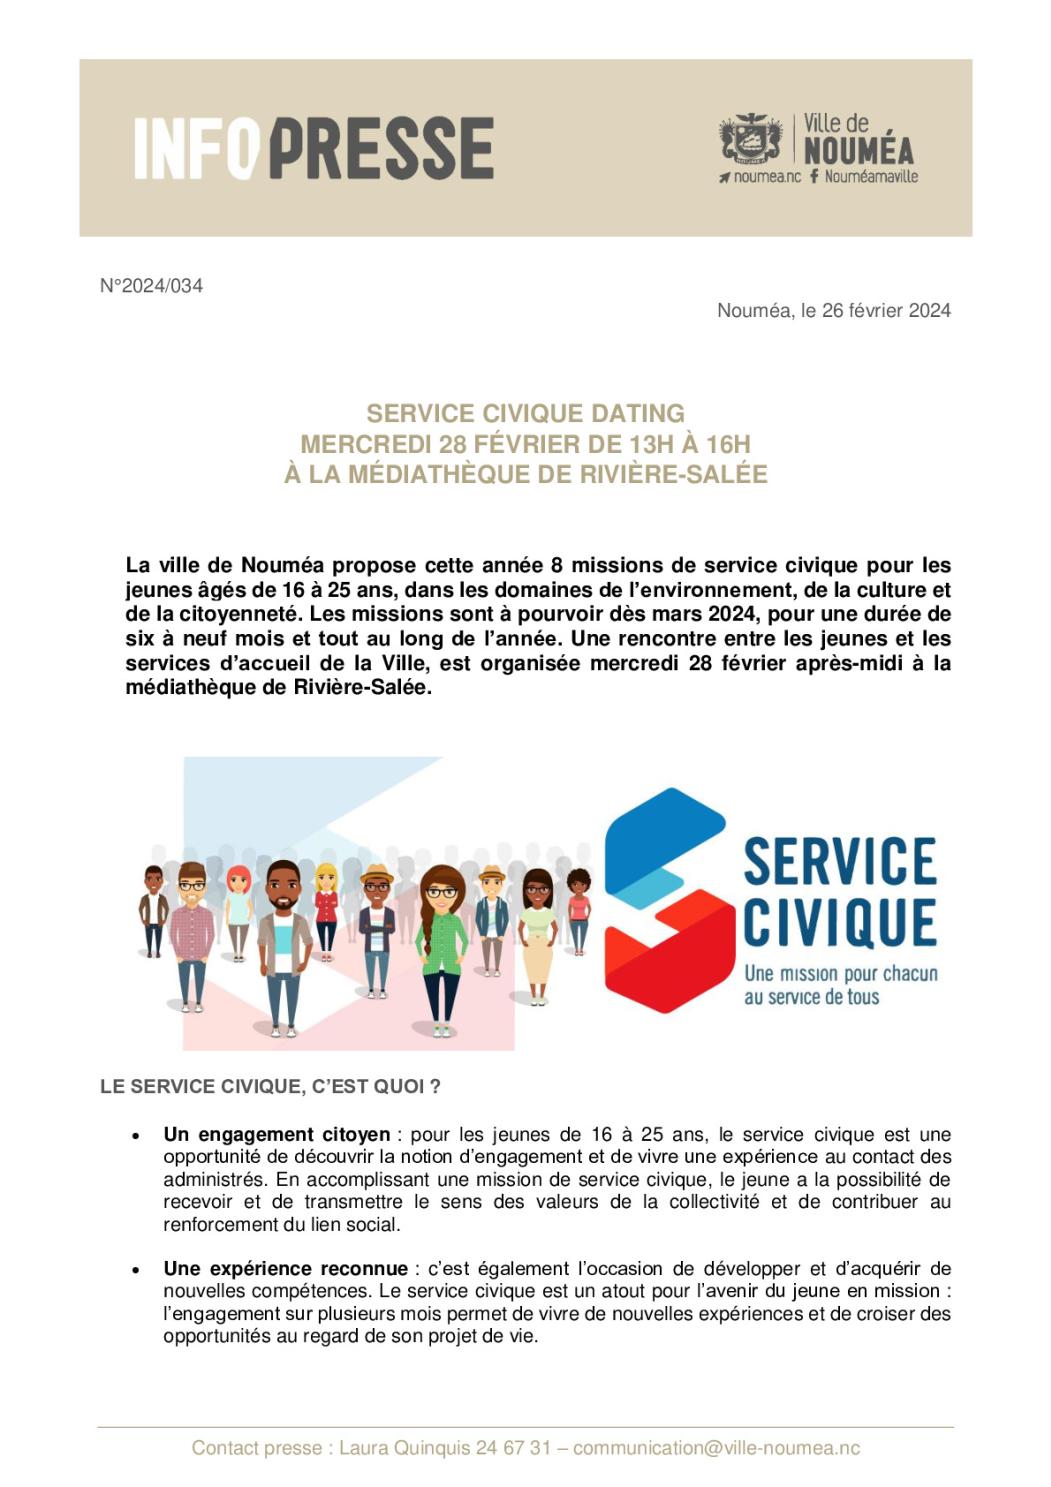 034 IP Service civique dating 2024 - nlle date.pdf